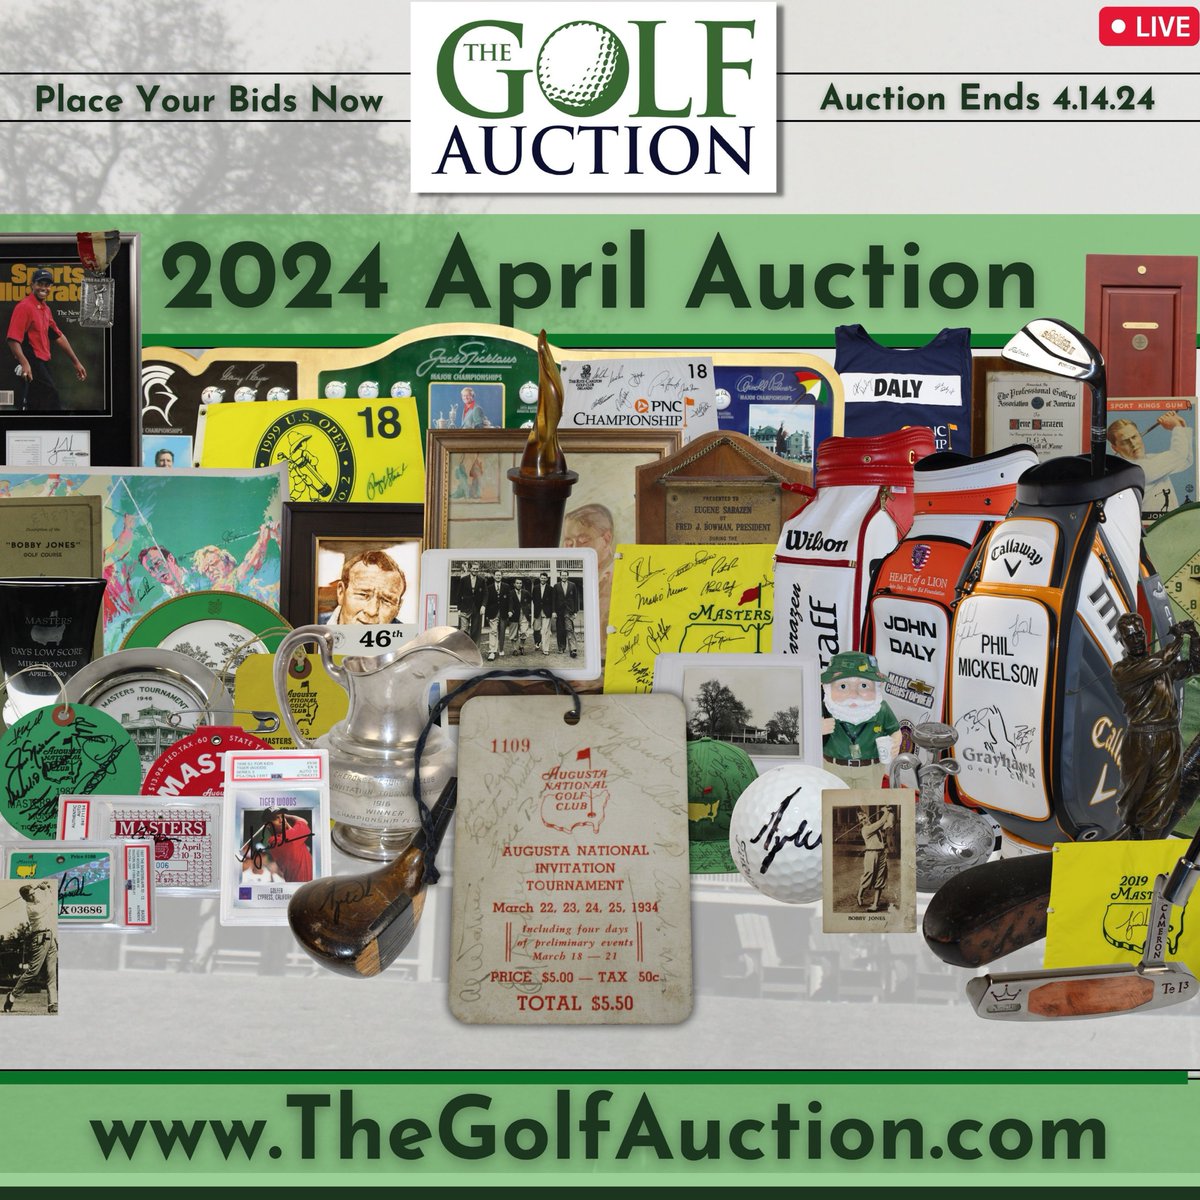 Golf is the one sport that almost all athletes from other sports have in common. @KirkCousins8 just purchased a golf course & @gkittle46 has a 6 hole course in his backyard. We have a few more #golf items that they might have interest in 😉⛳️
#themasters
thegolfauction.com/mobile/catalog…